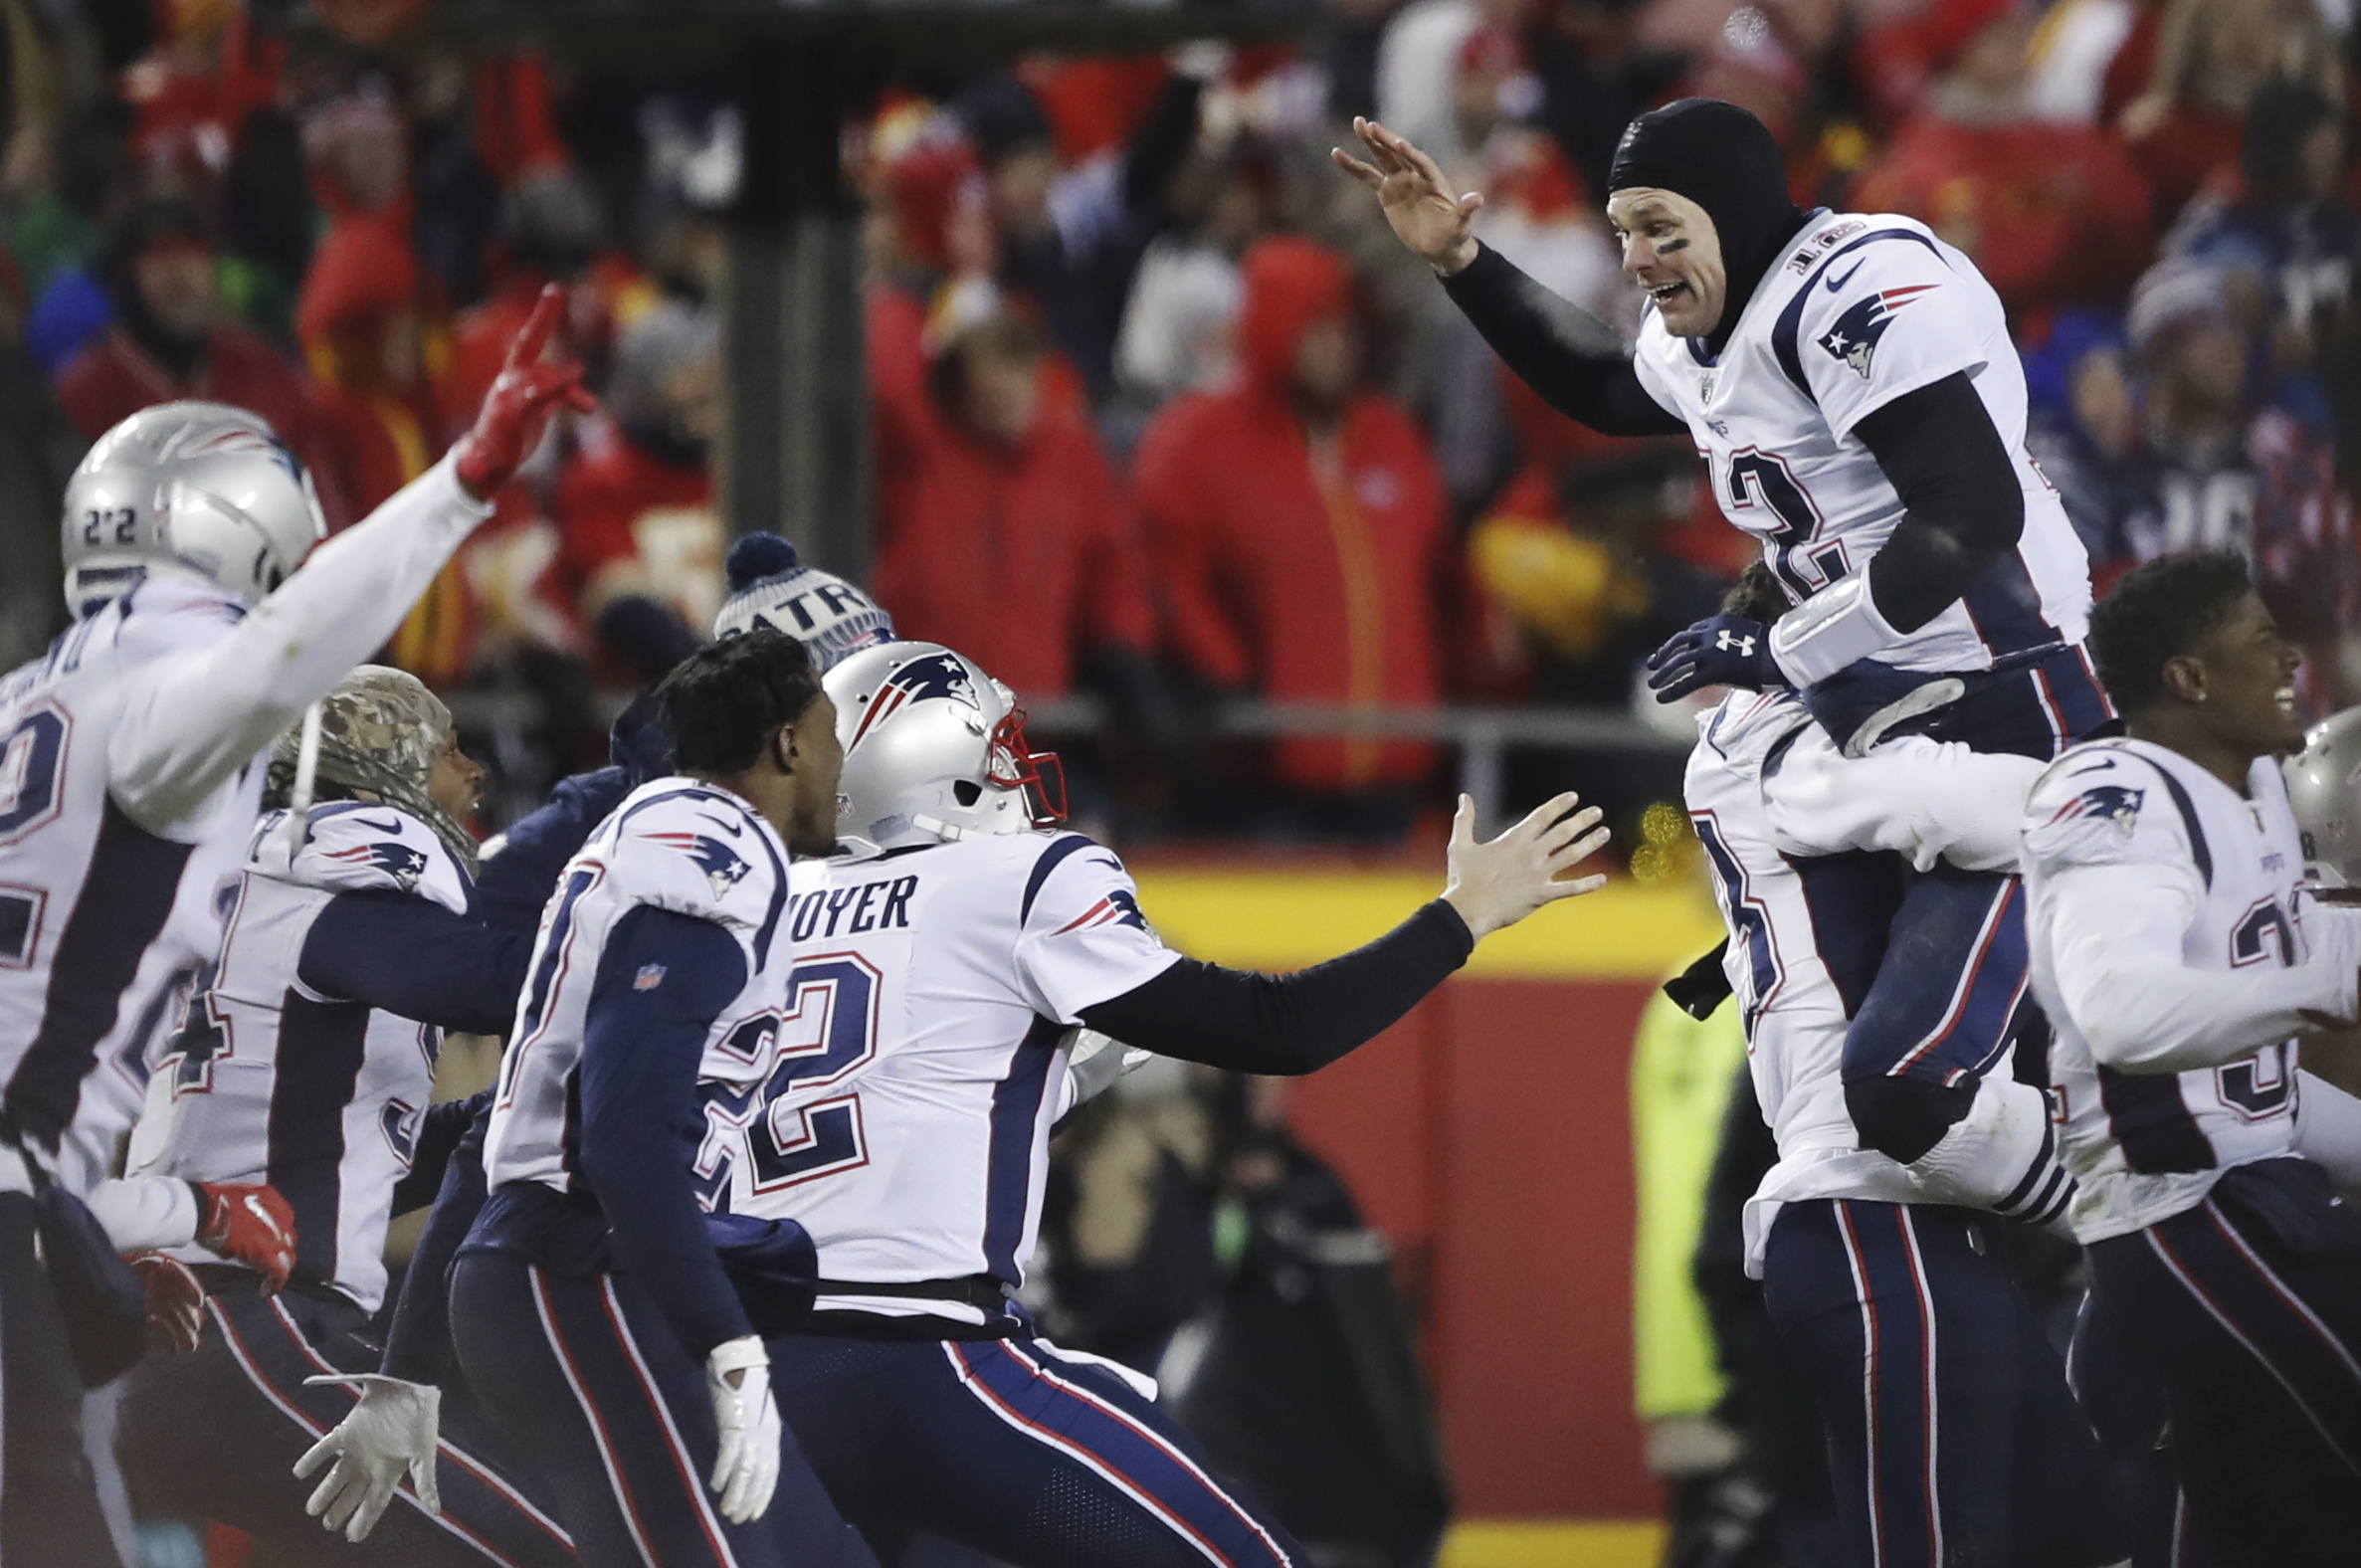 Super Bowl: Pats vs Rams in a meeting of Past vs Future - The Daily Universe